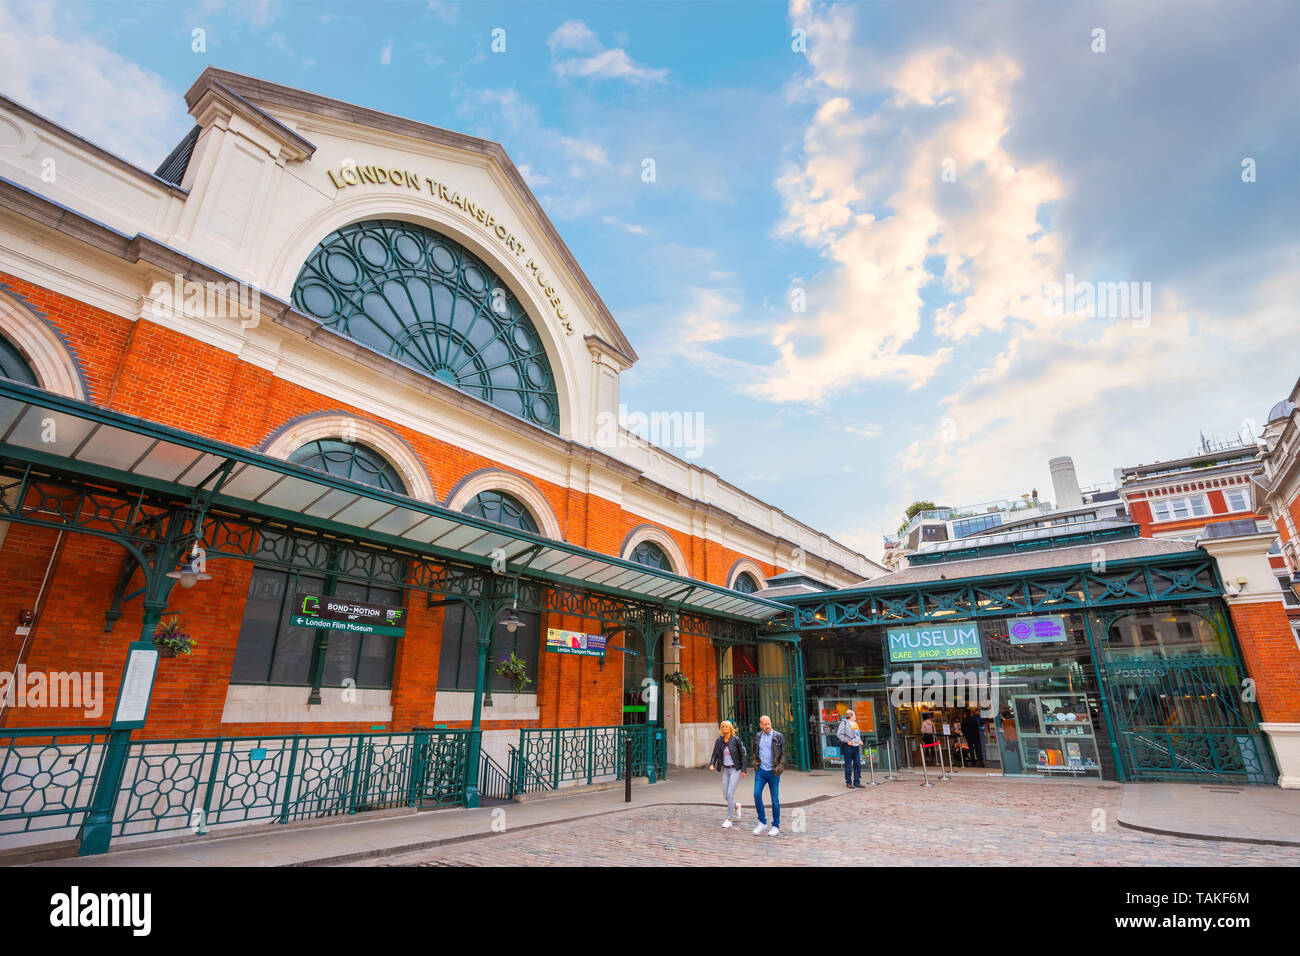 London, United Kingdom - May 12 2018: The London Transport Museum in Covent Garden, conserves and explains the transport heritage of Britain's capital Stock Photo